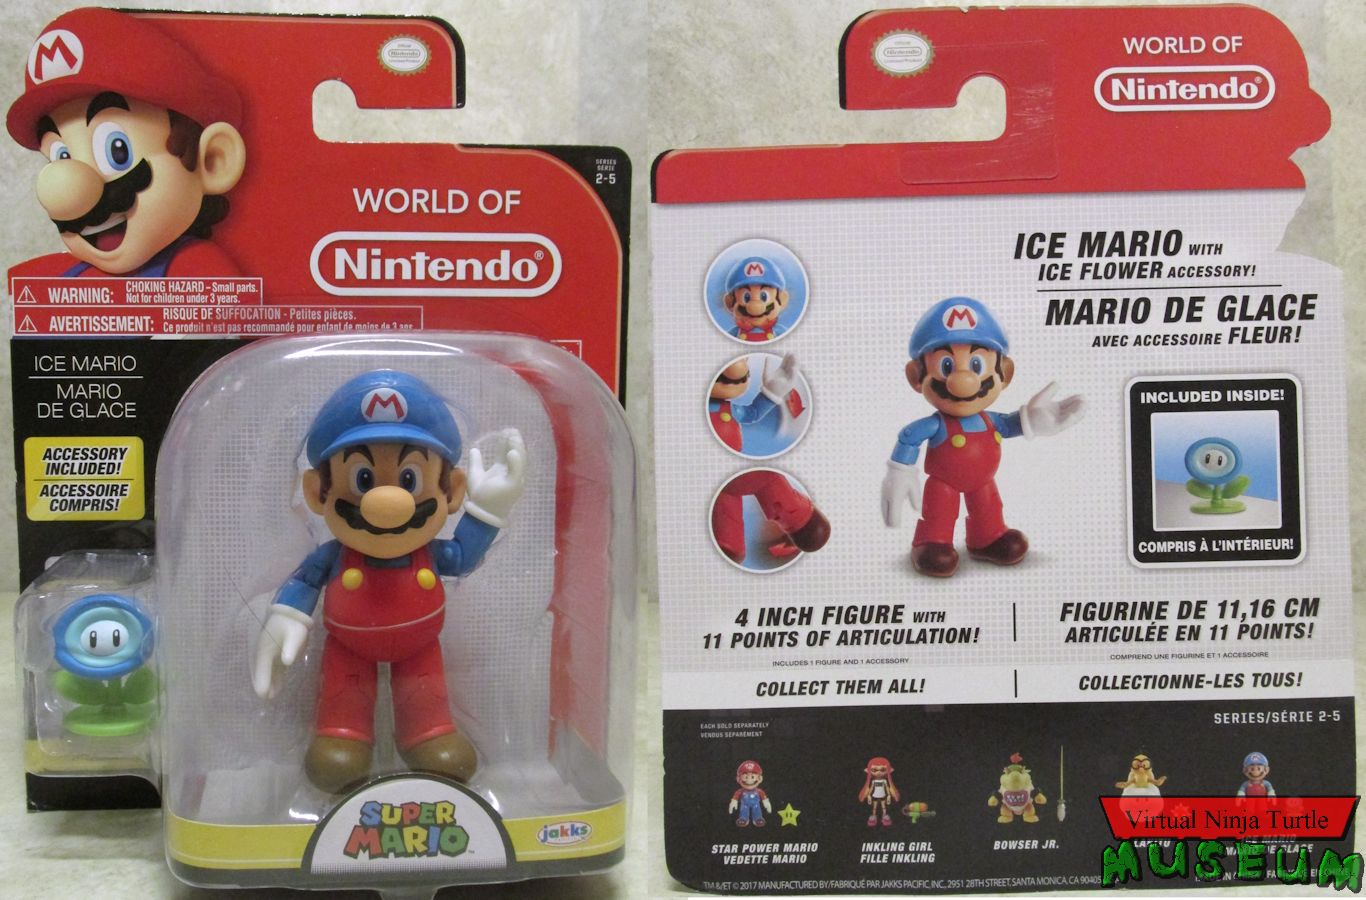 Ice Mario card front and back